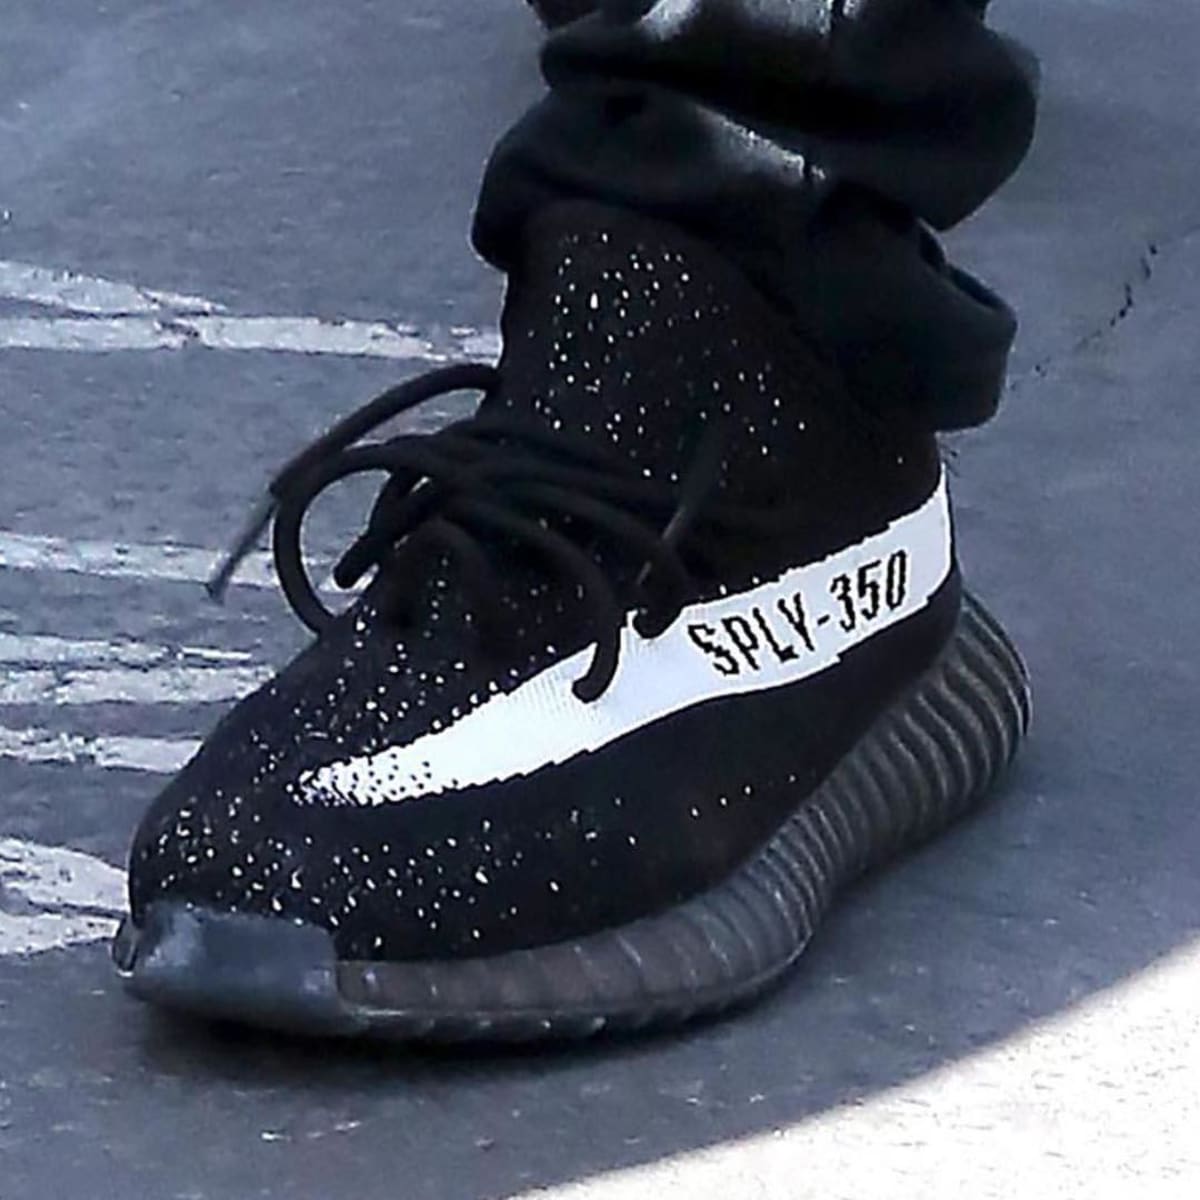 adidas Yeezy 350 Boost Black/White Stripe - adidas Yeezy Boosts That Haven't Released Yet | Sole 